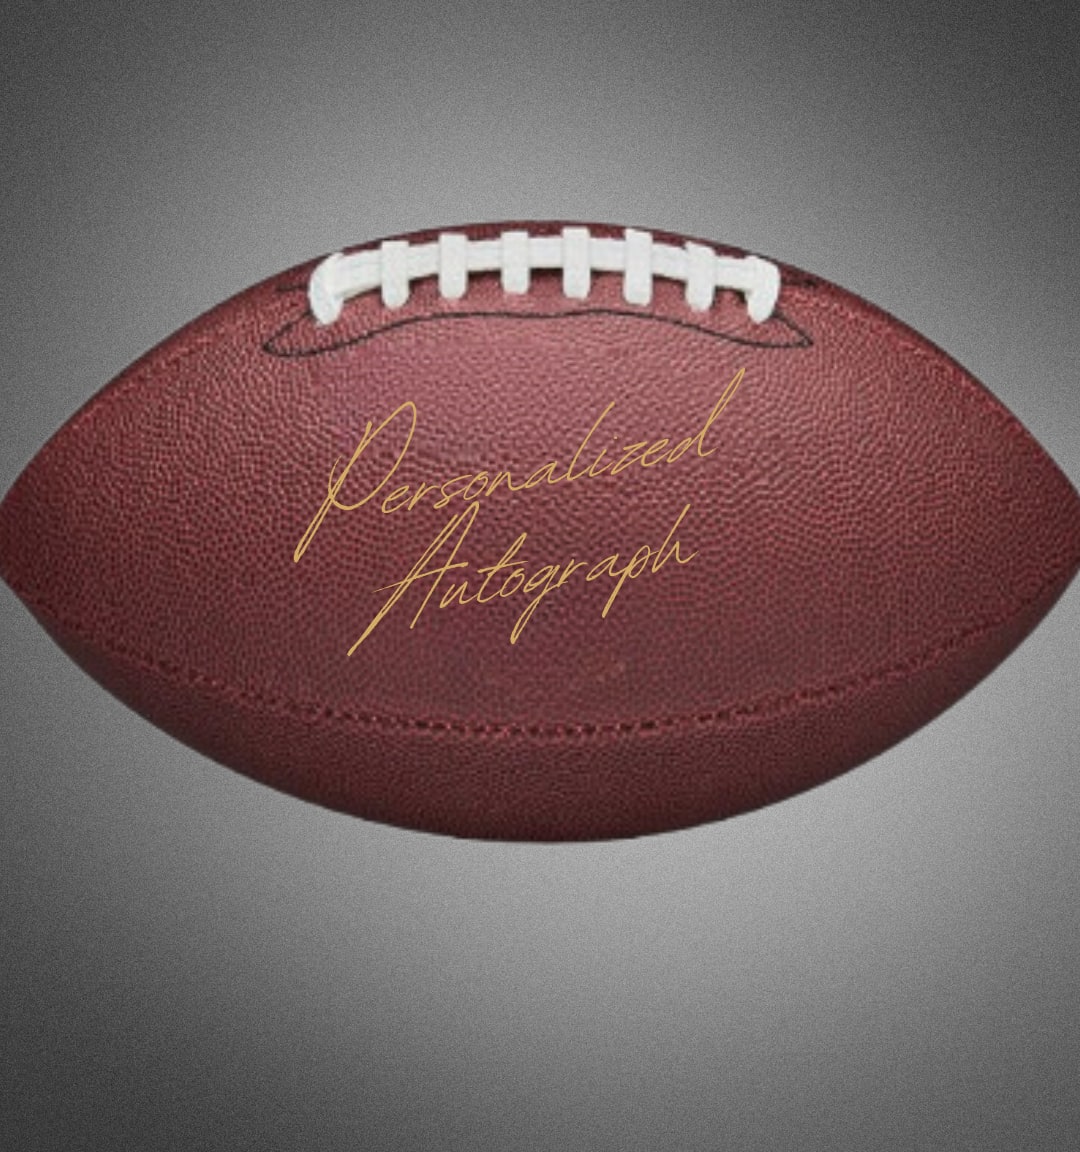 Limited Edition Alfred Anderson Autographed Football